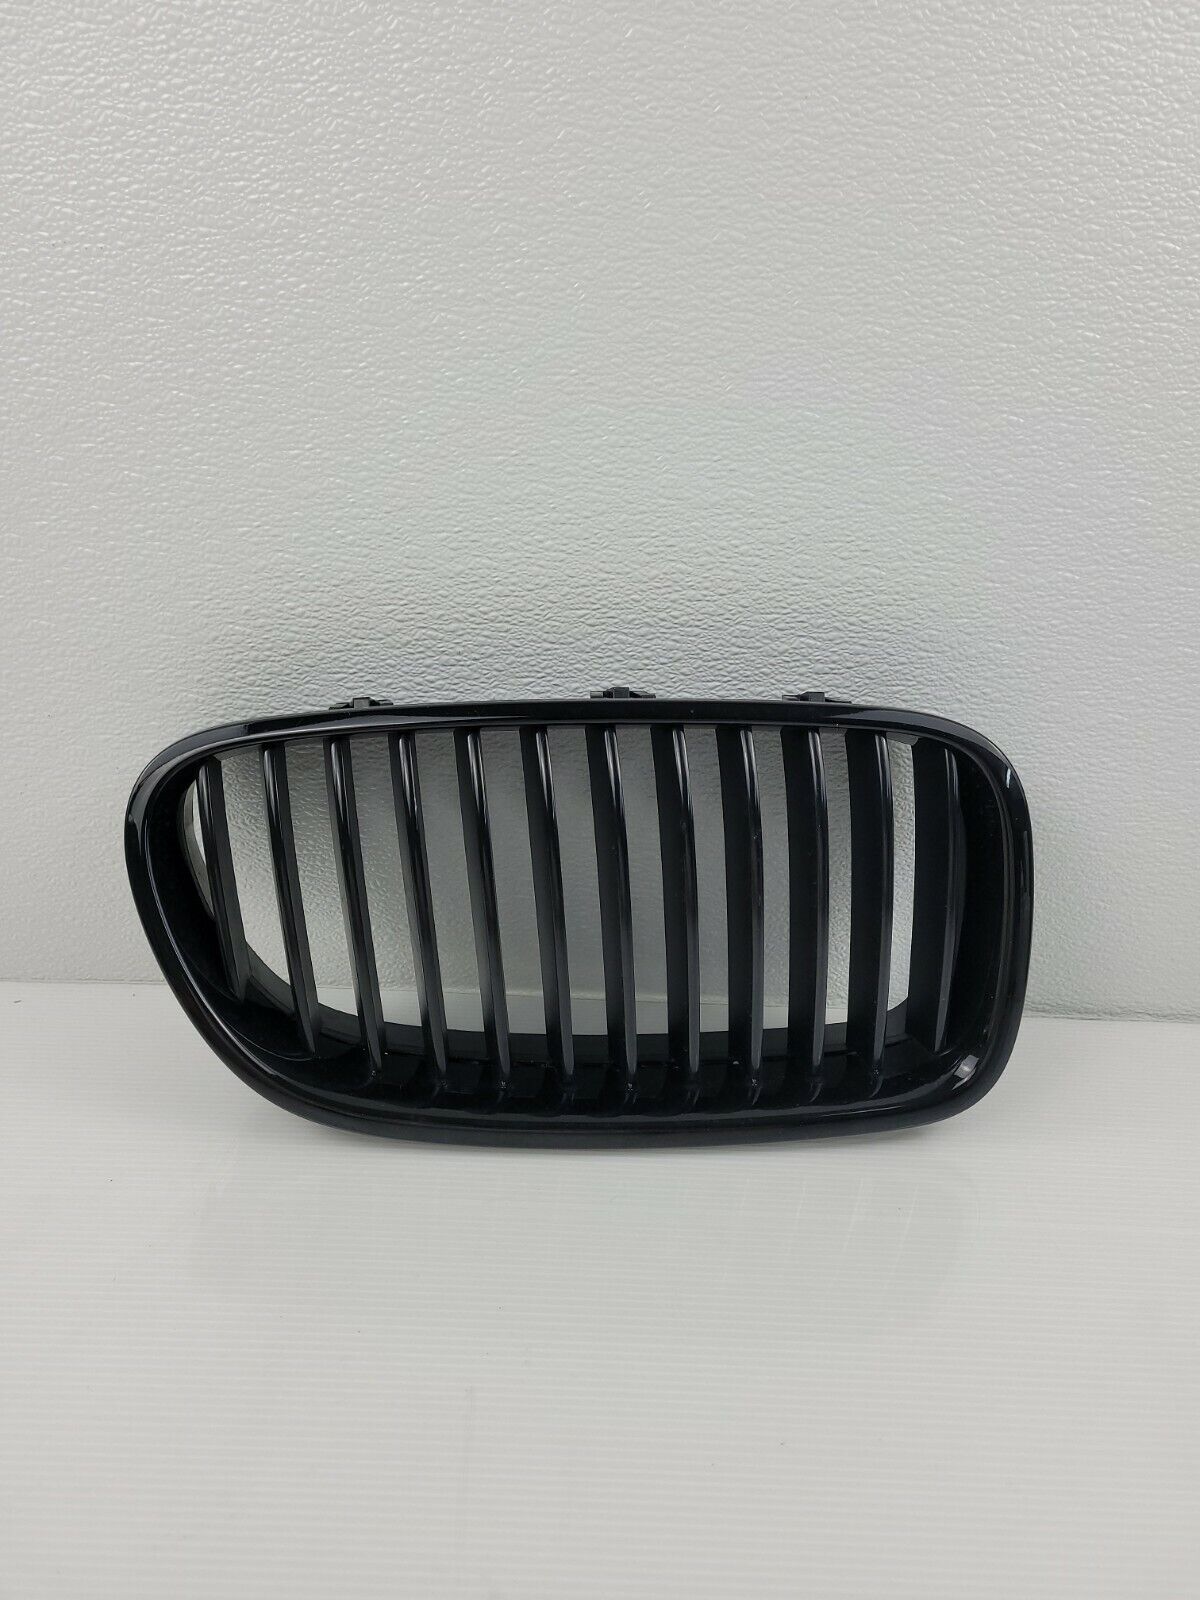 GENUINE BMW 5 SERIES F10 F11 M FRONT BUMPER O/S RIGHT KIDNEY GRILLE 2165528 OEM